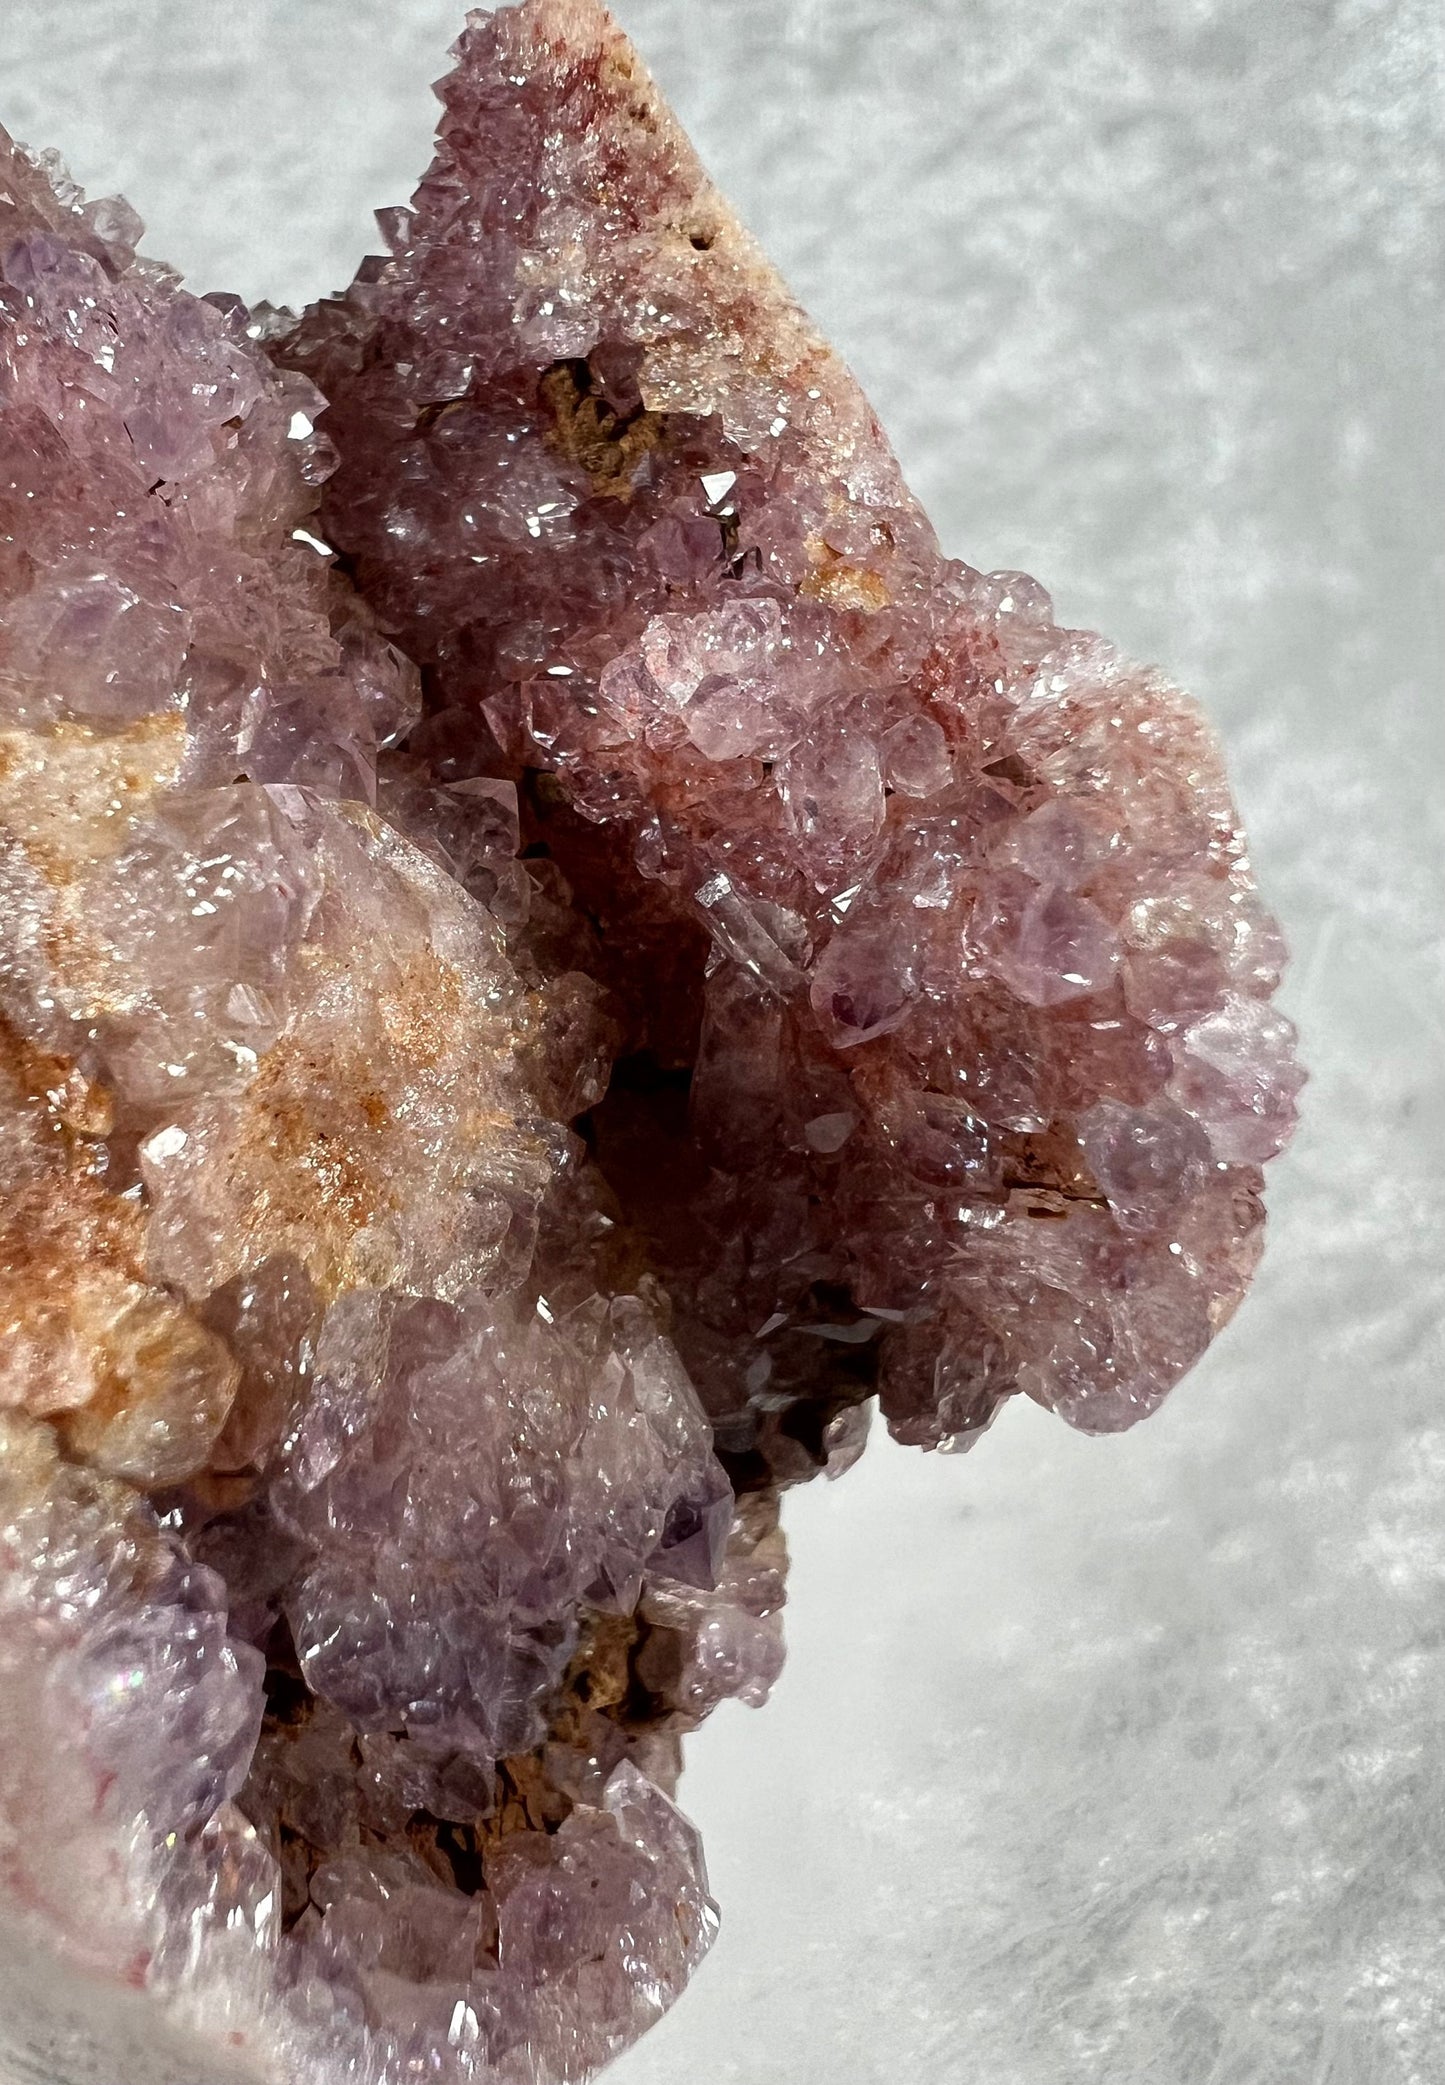 Stunning Druzy Pink Amethyst Freeform. Beautiful Druzy Amethyst With Incredible Flash And Flowers. Amazing Pinks And Purples